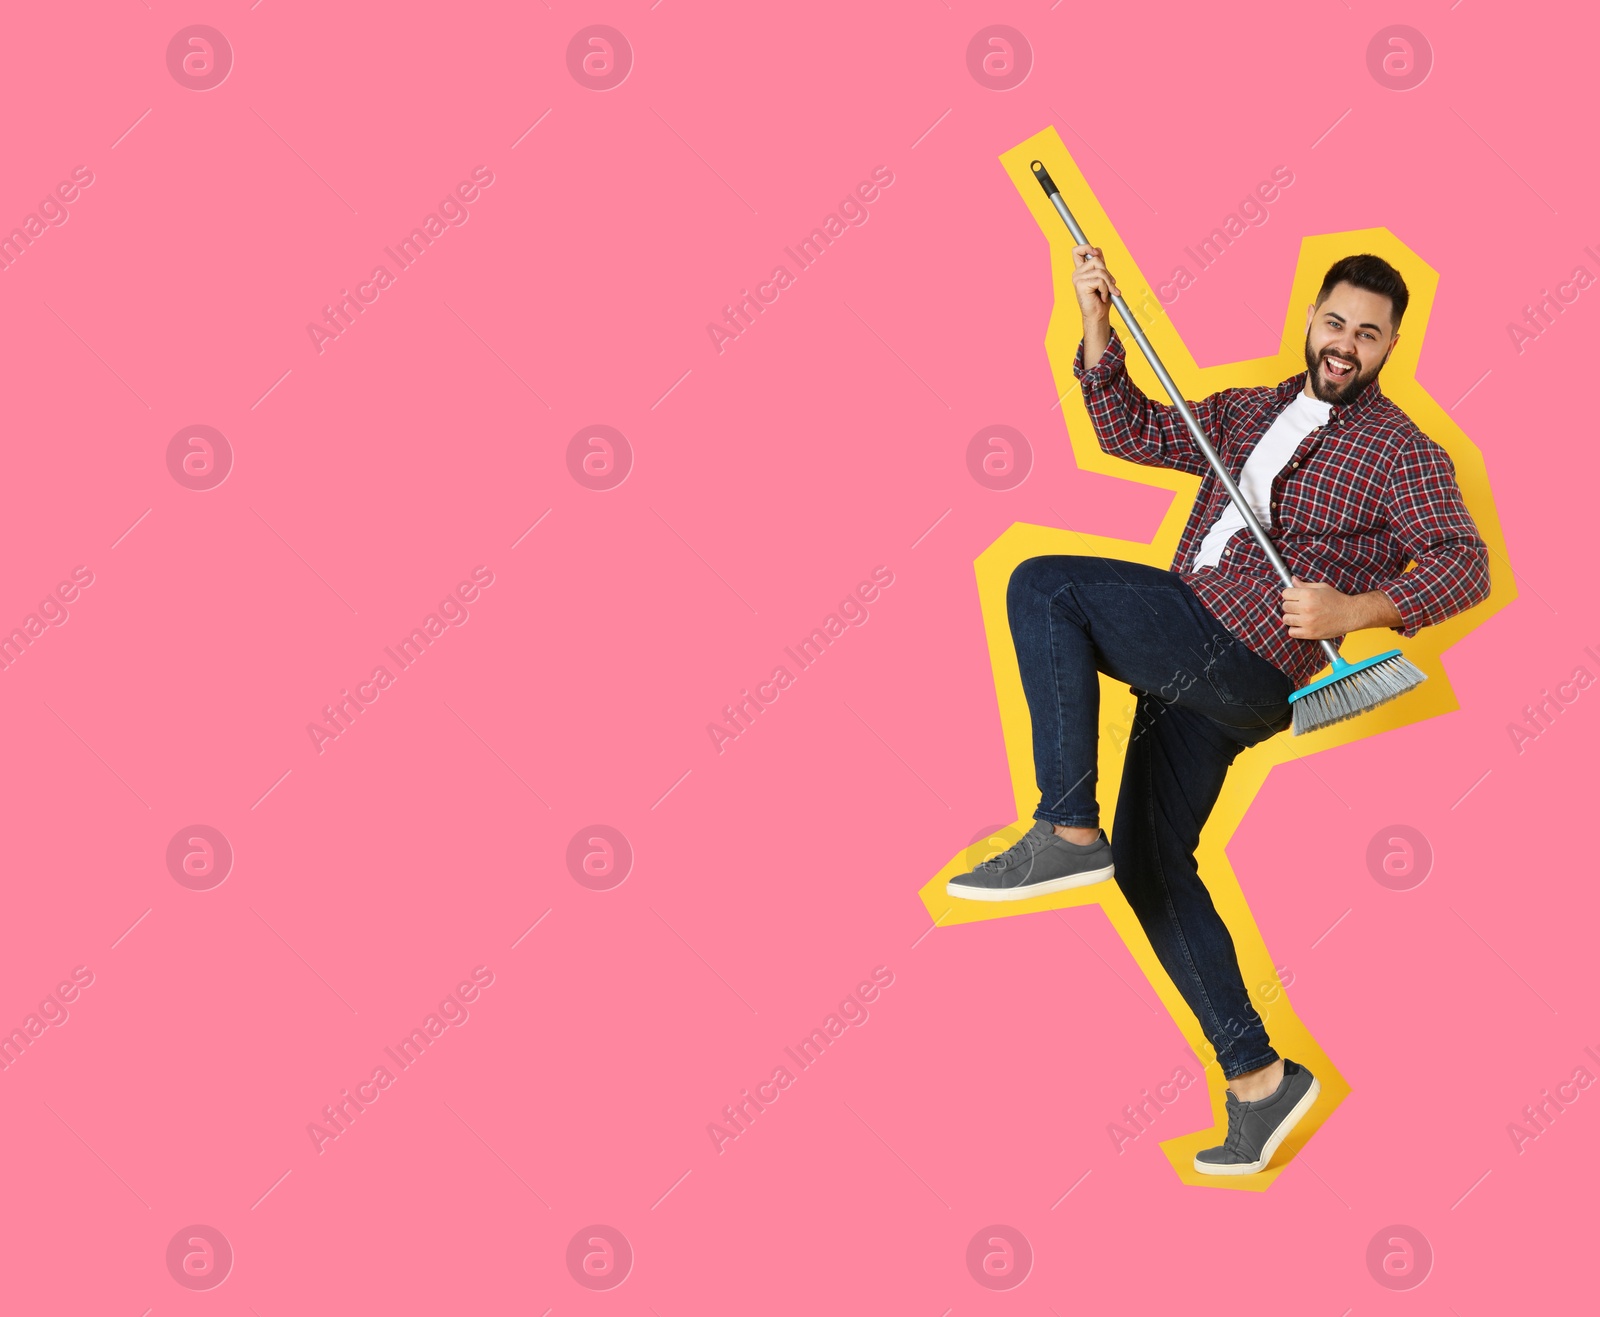 Image of Pop art poster. Young man with broom having fun on pink background. Space for text